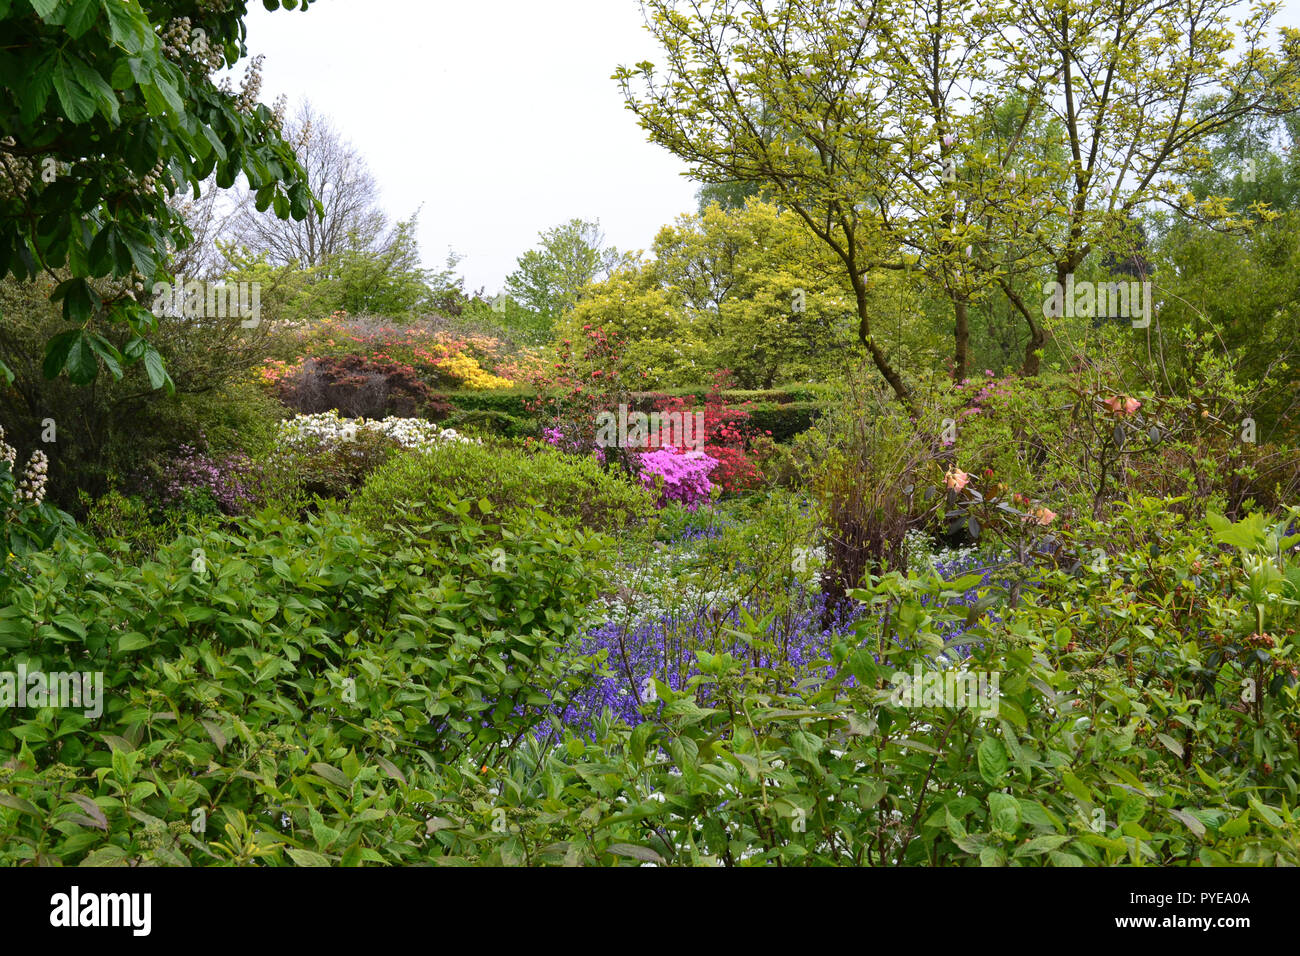 A view across Emmetts Garden in Ide Hill, Kent, England. Renowned for bluebells, the NT garden is high on the North Downs Greensand escarpment Stock Photo